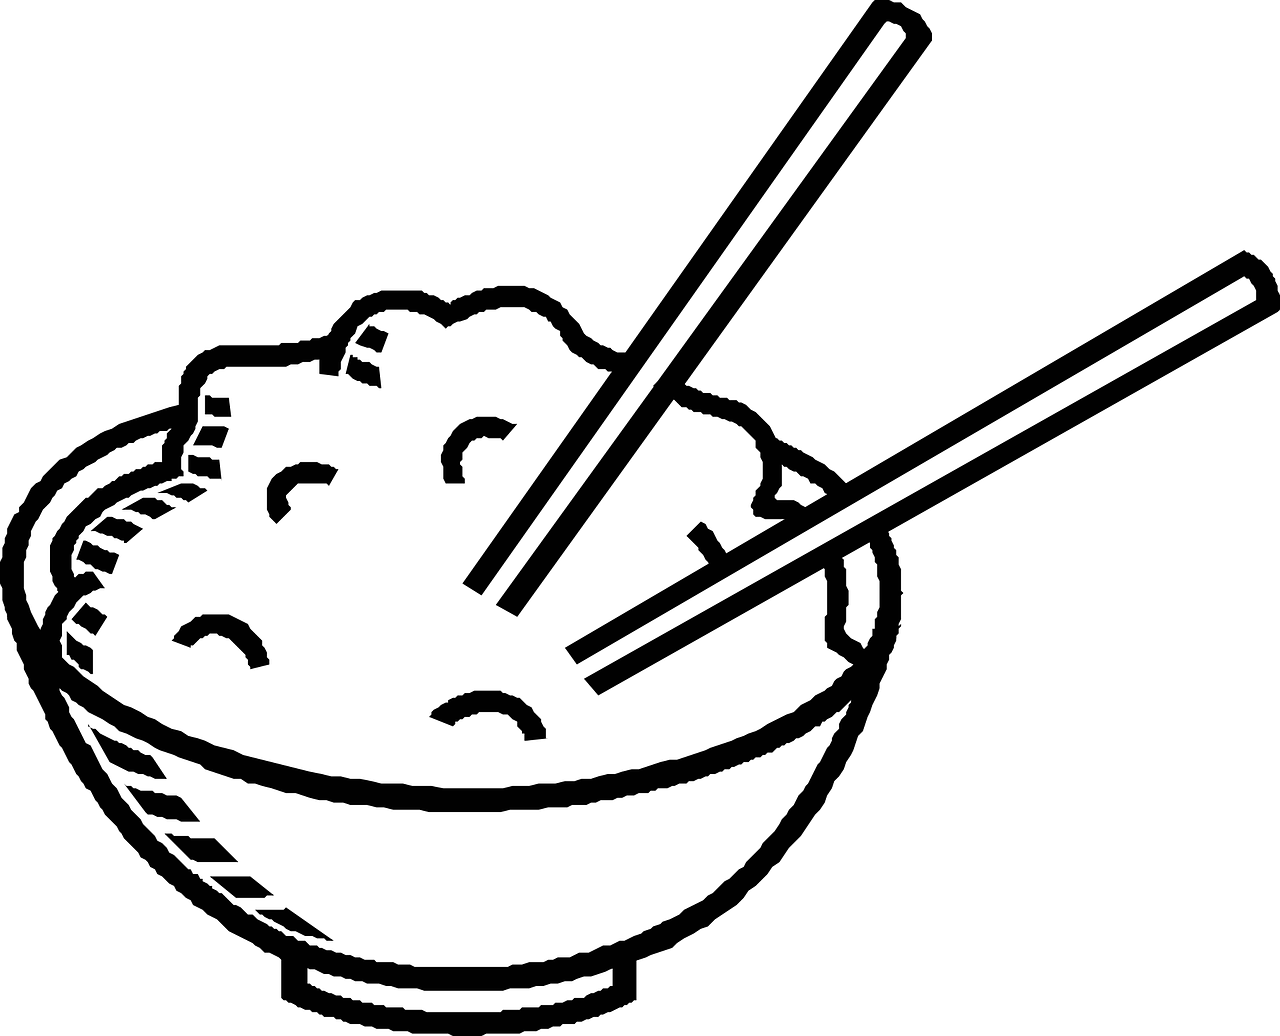 Chopsticks Chinese Food Bowl - Free vector graphic on Pixabay